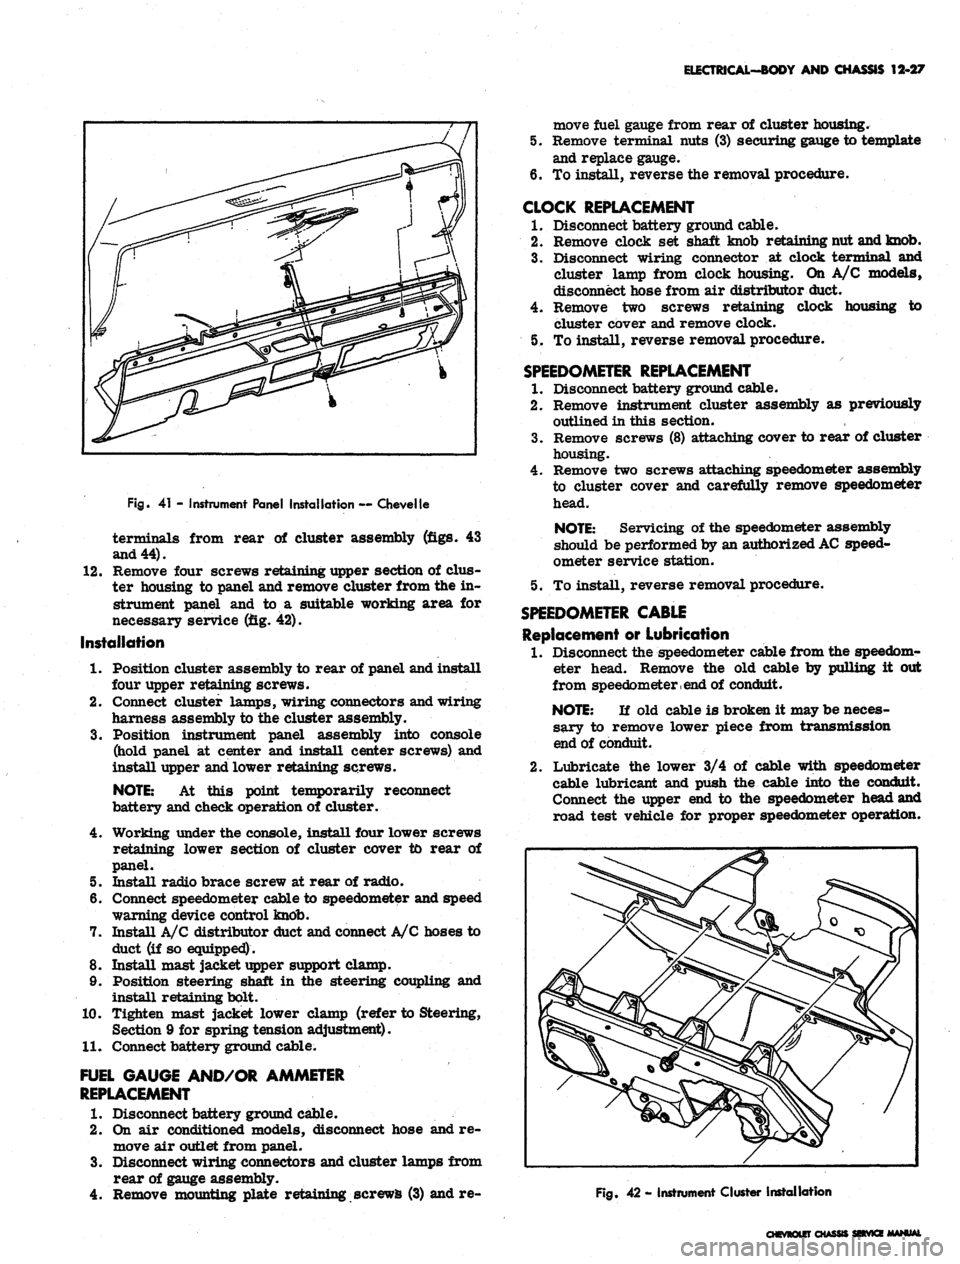 CHEVROLET CAMARO 1967 1.G Chassis Workshop Manual 
ELECTRICAL-BODY AND CHASSIS 12-27

Fig.
 41 - Instrument Panel Installation — Chevelle

terminals from rear of cluster assembly (figs. 43

and 44).

12.
 Remove four screws retaining upper section 